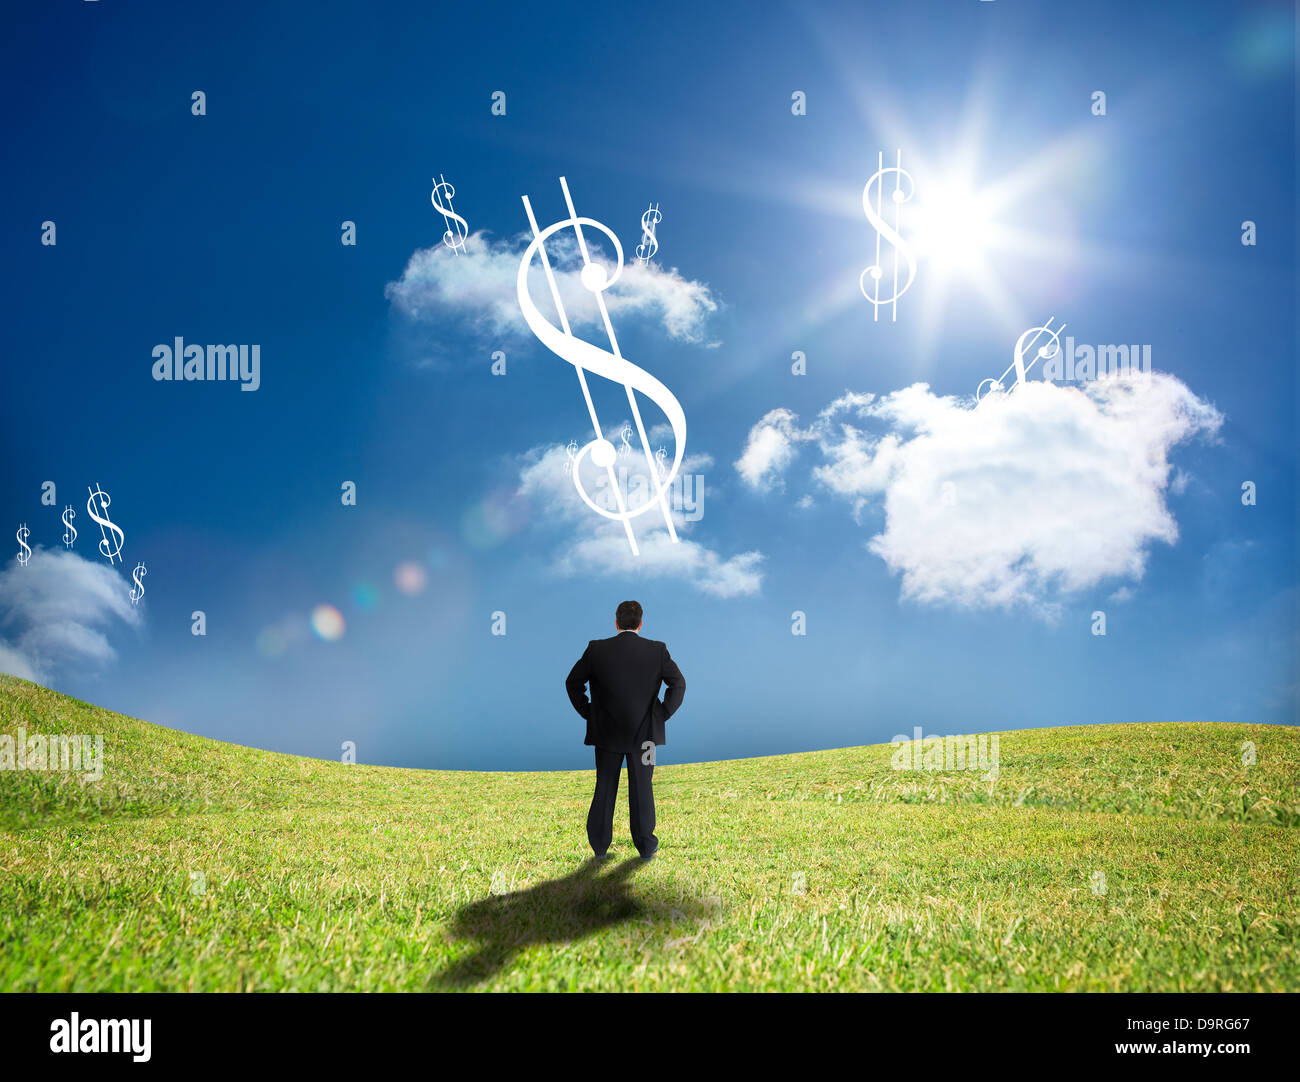 Businessman looking up at dollar signs in the sky Stock Photo